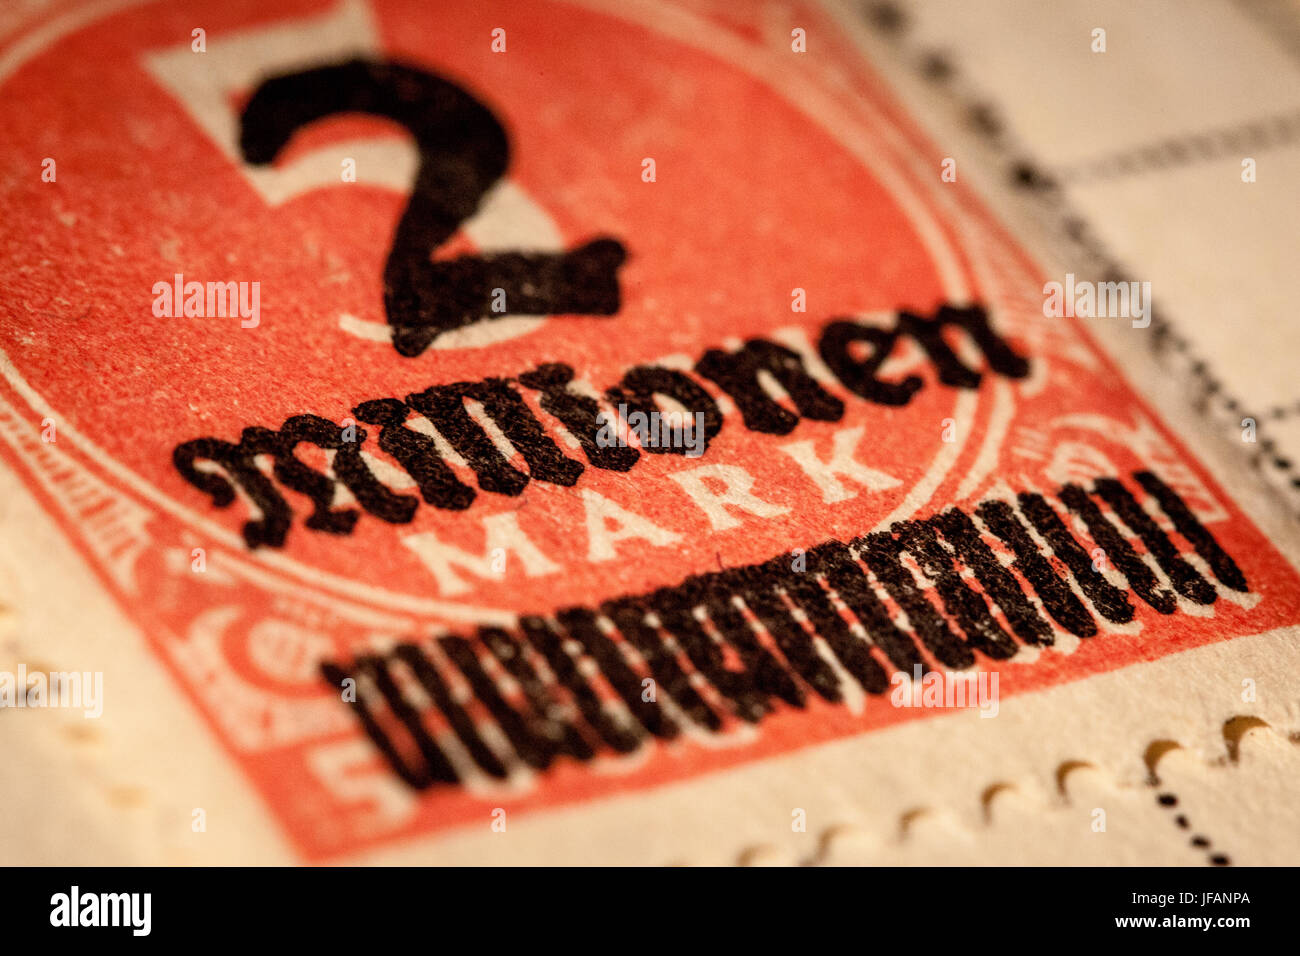 Postage Stamp Inflation - Overprinted 2 Million Mark postage stamp from pre-war Germany from a time when inflation was rampant Stock Photo